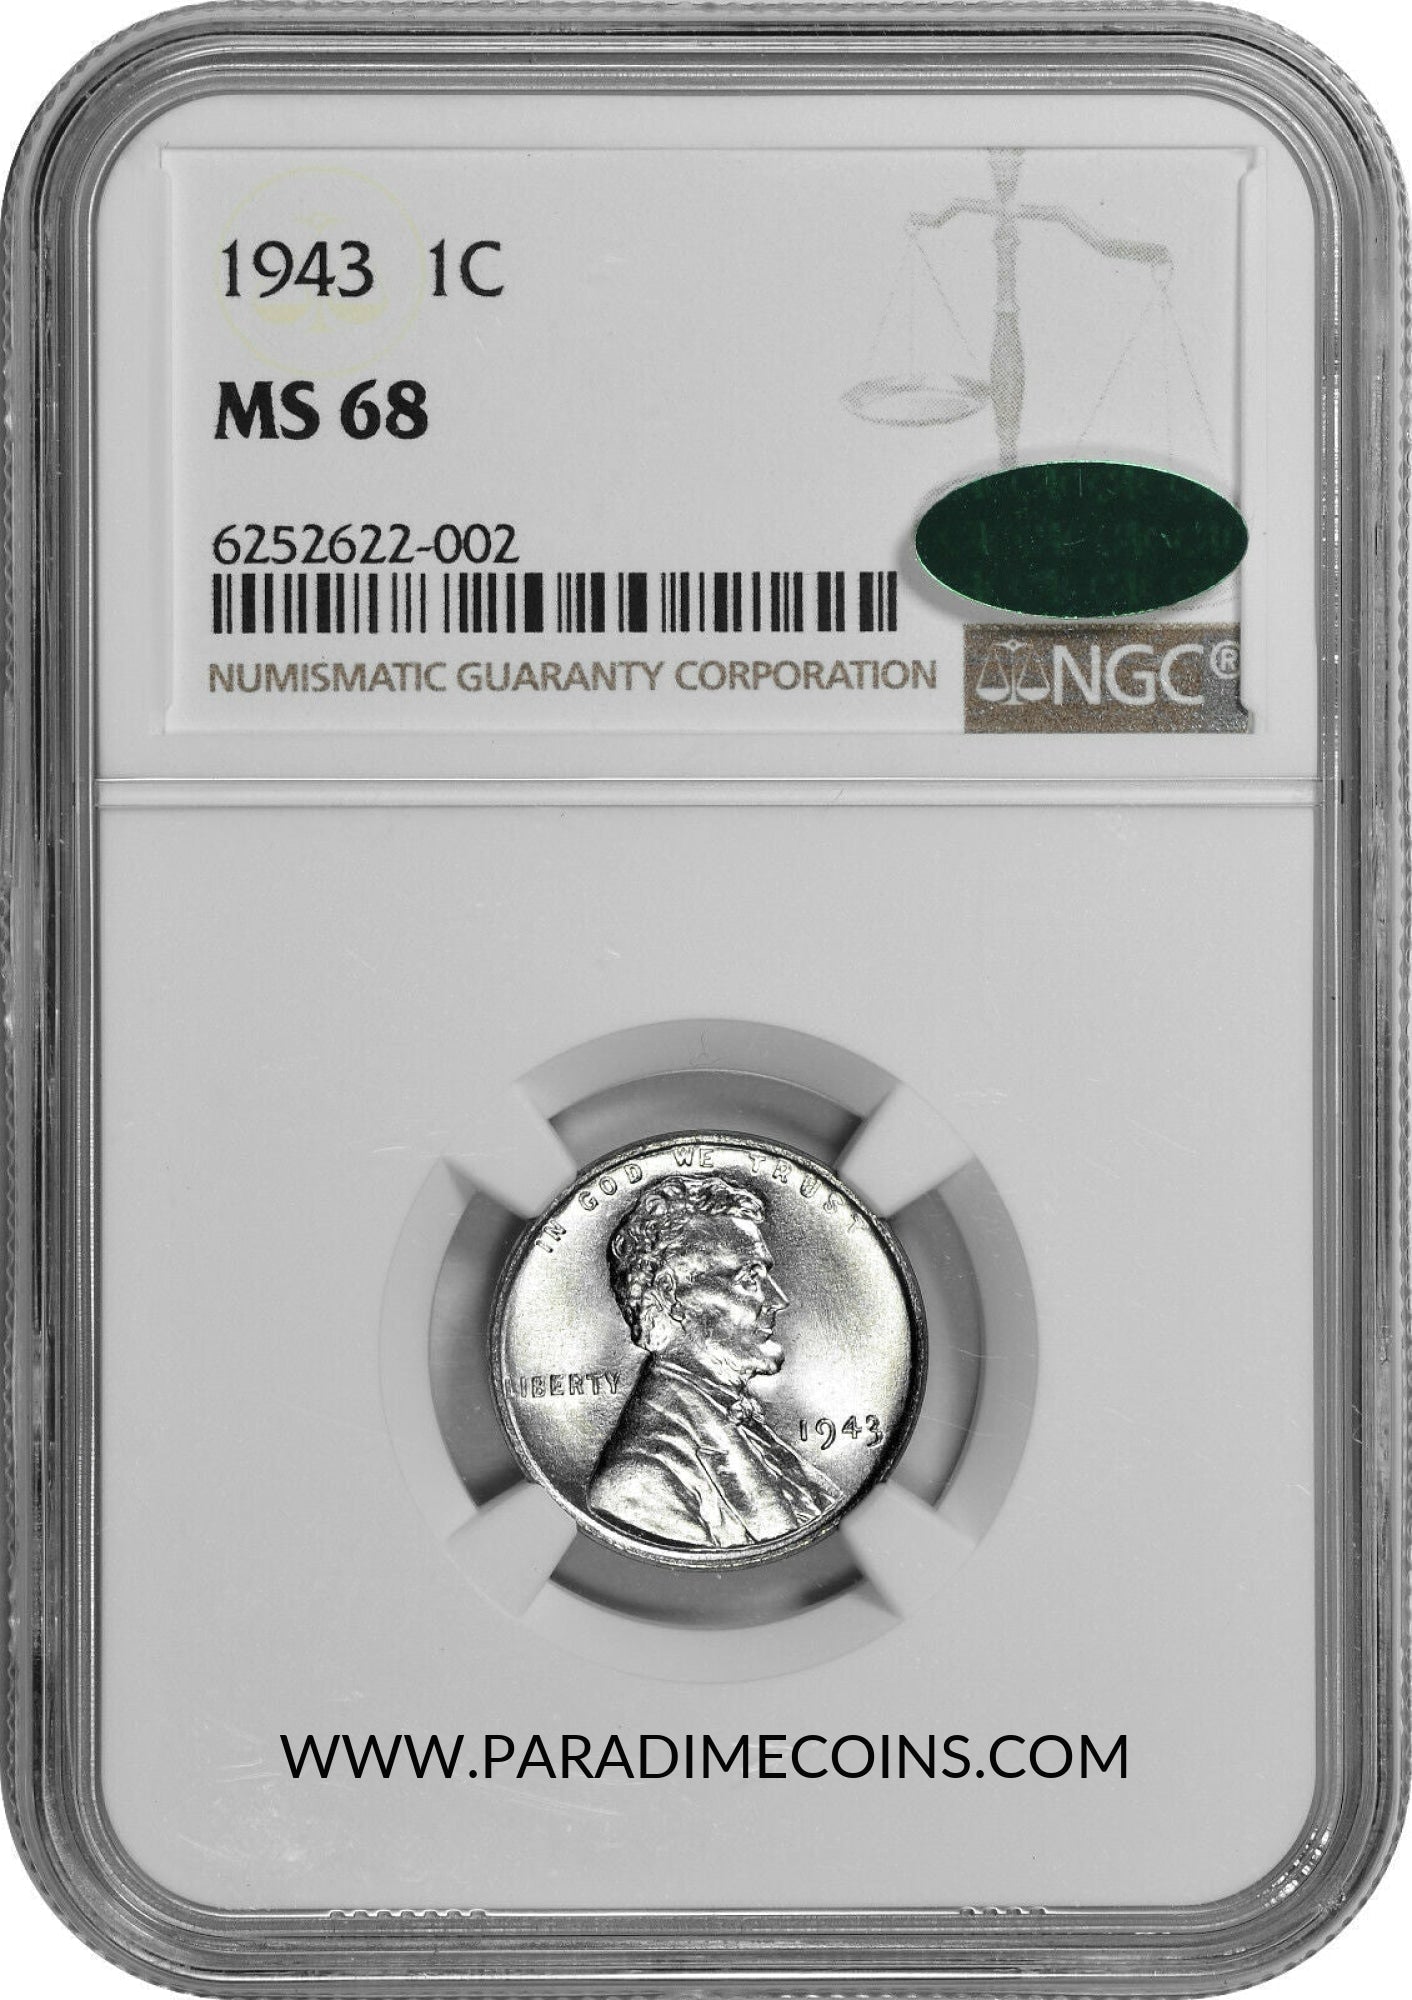 1943 1C MS68 NGC CAC - Paradime Coins US Coins For Sale